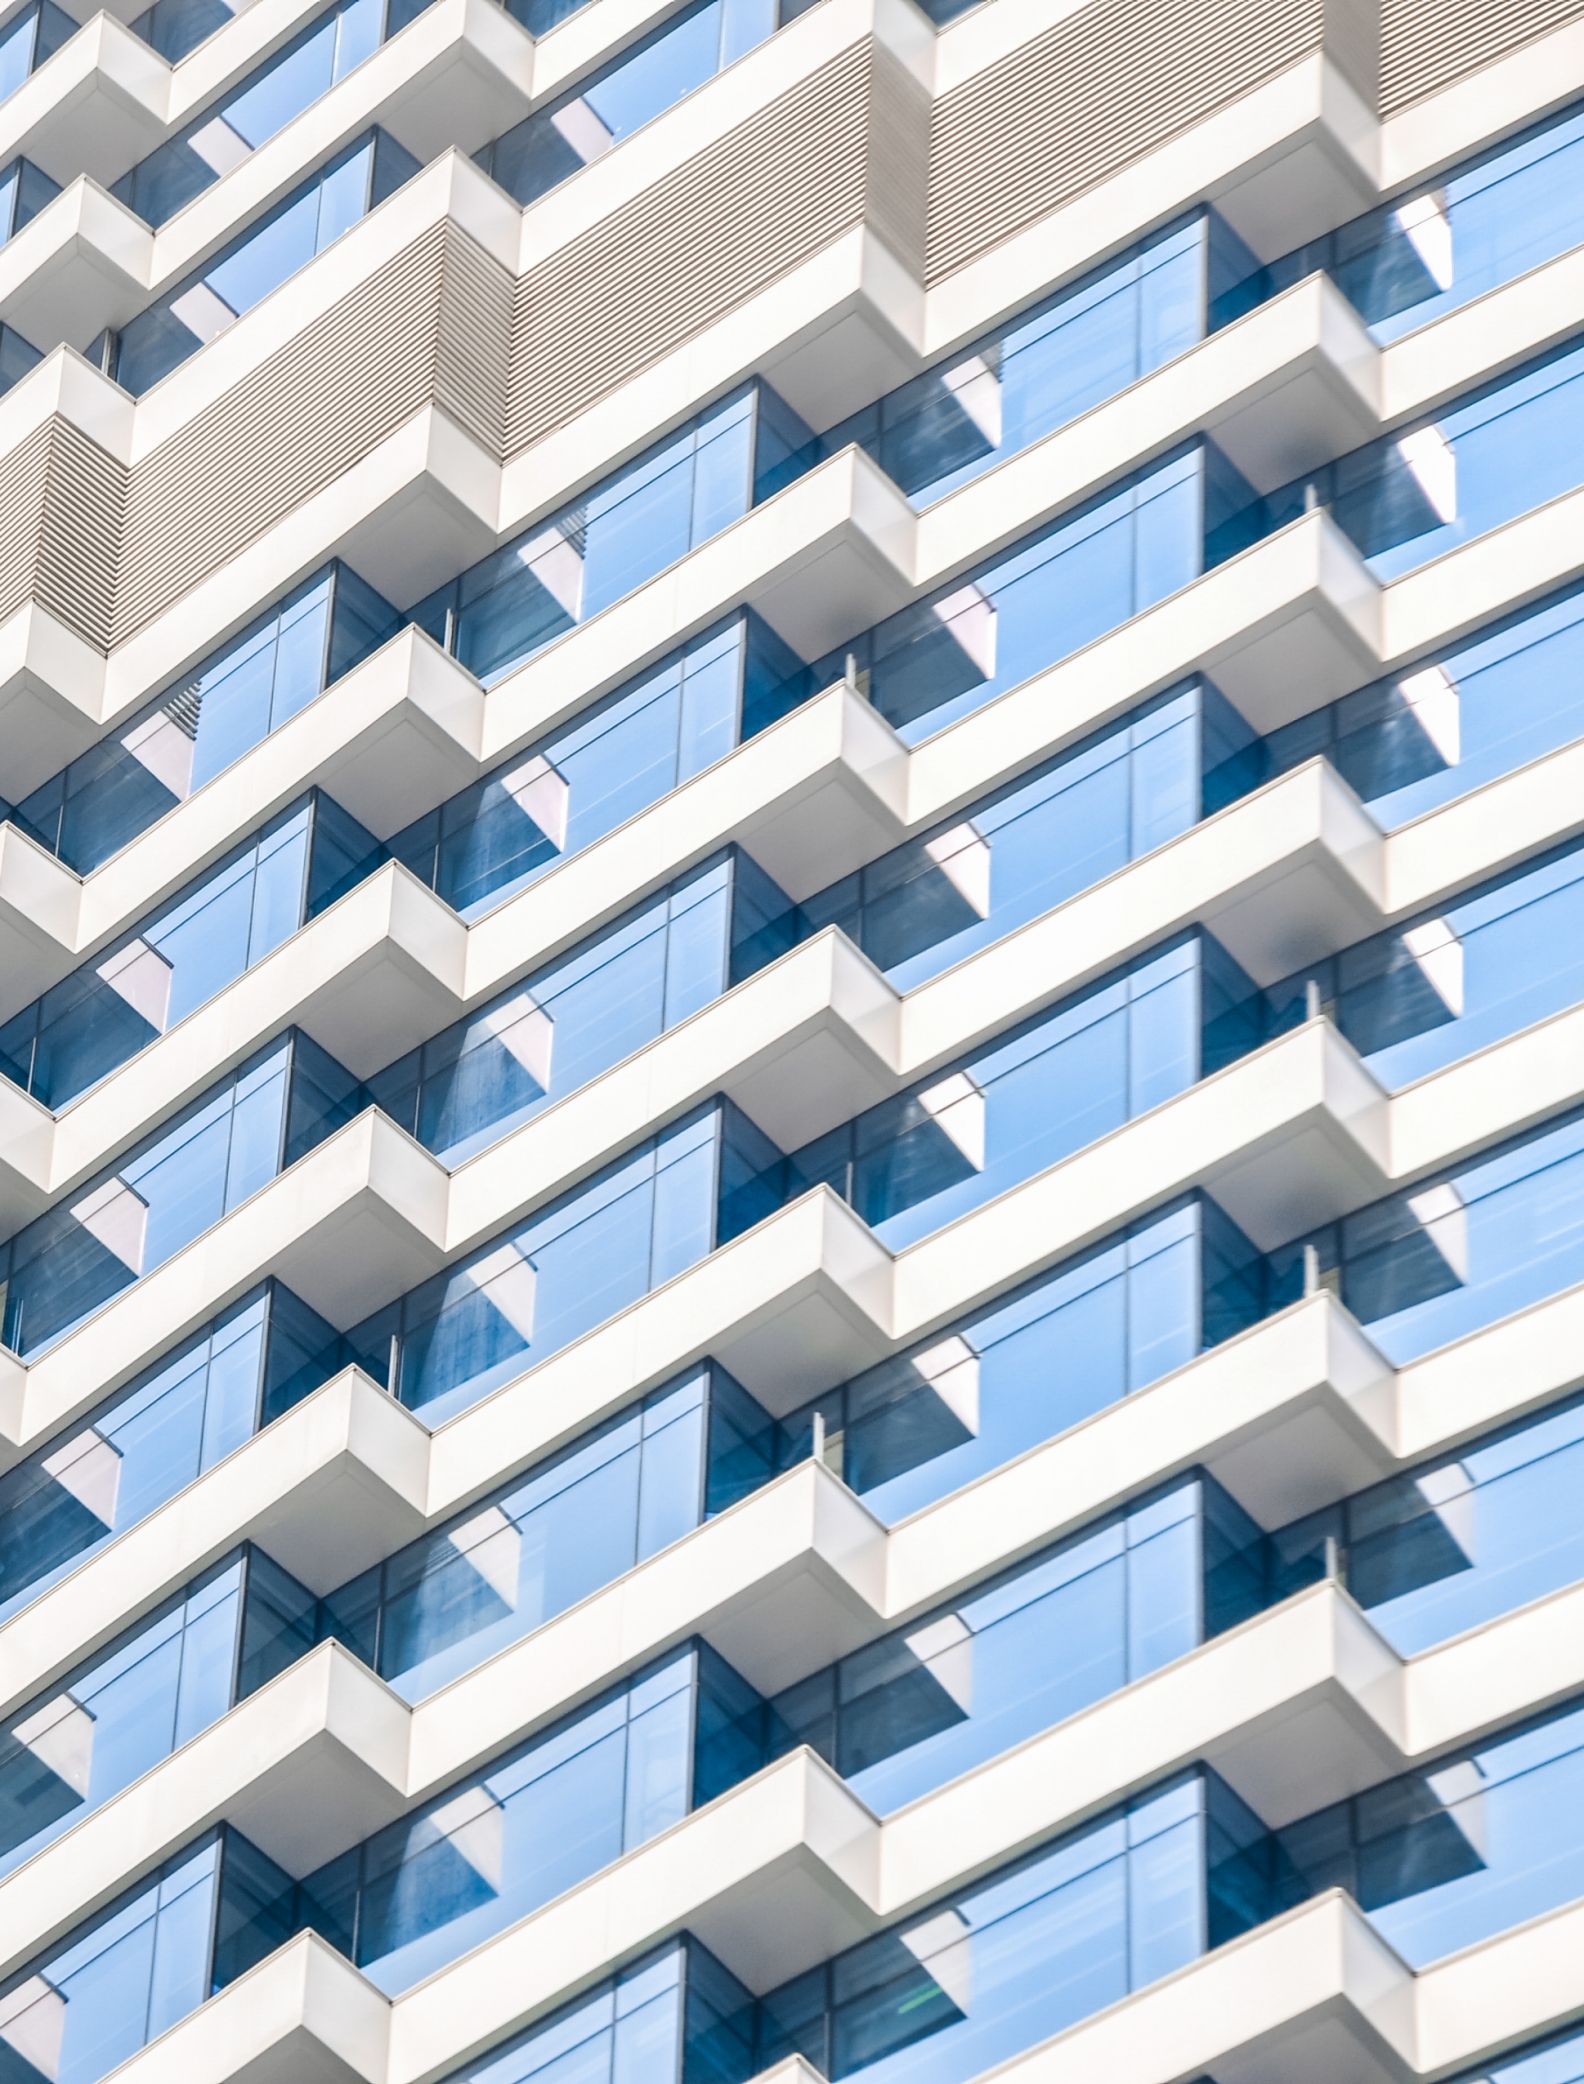 Corner of building showing multiple levels with concentric angles, creating a pattern effect